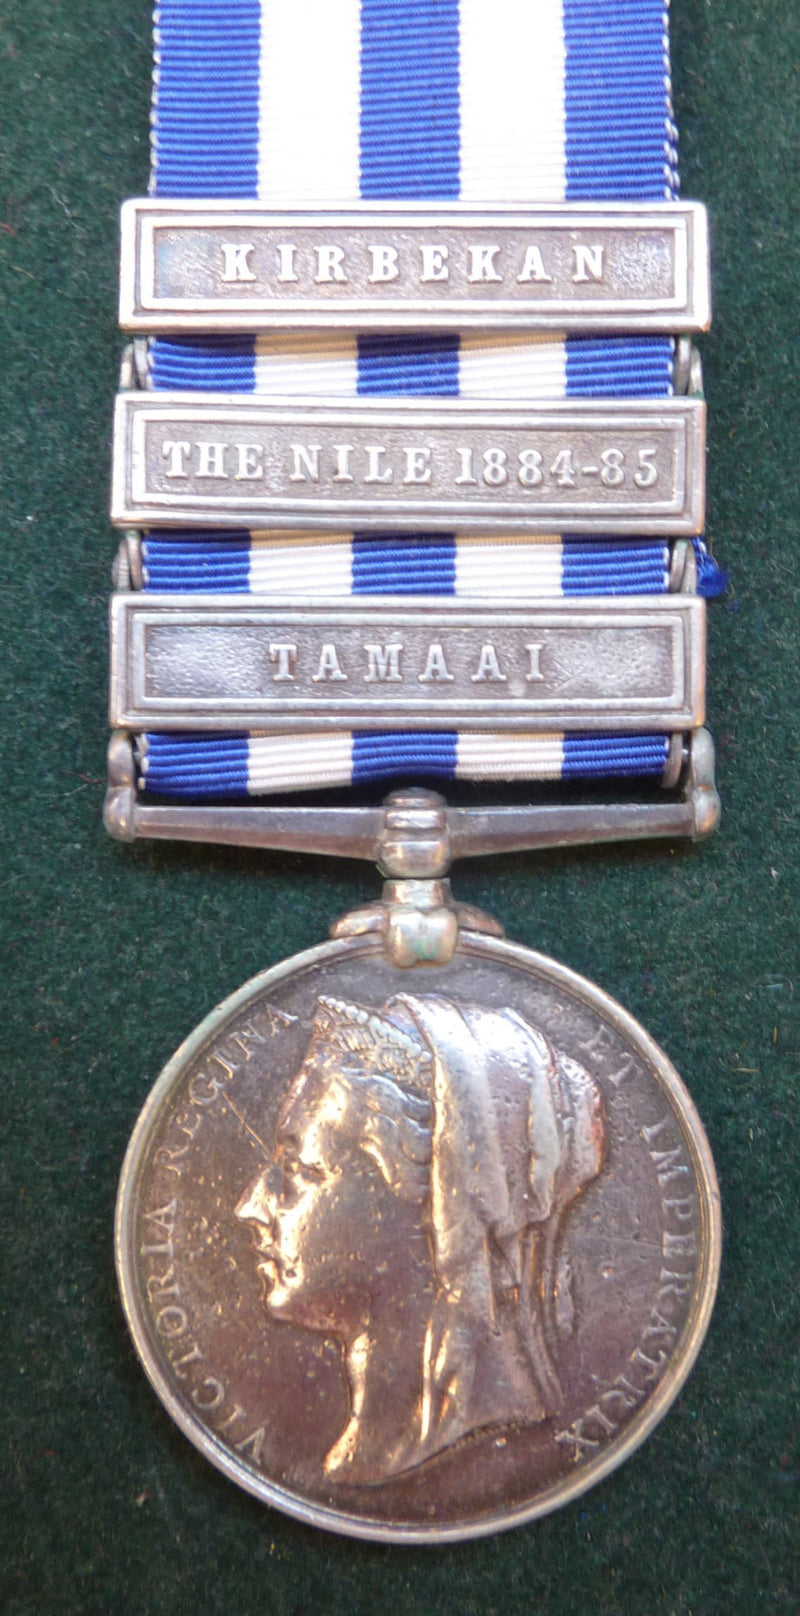 Single: Egypt Medal (undated) three clasps: "TAMAAI, THE NILE 1884-85 & KIRBEKAN" correct period engraved naming to 2452 PTE D. KENEALY 19th HUSSARS. - VF SOLD